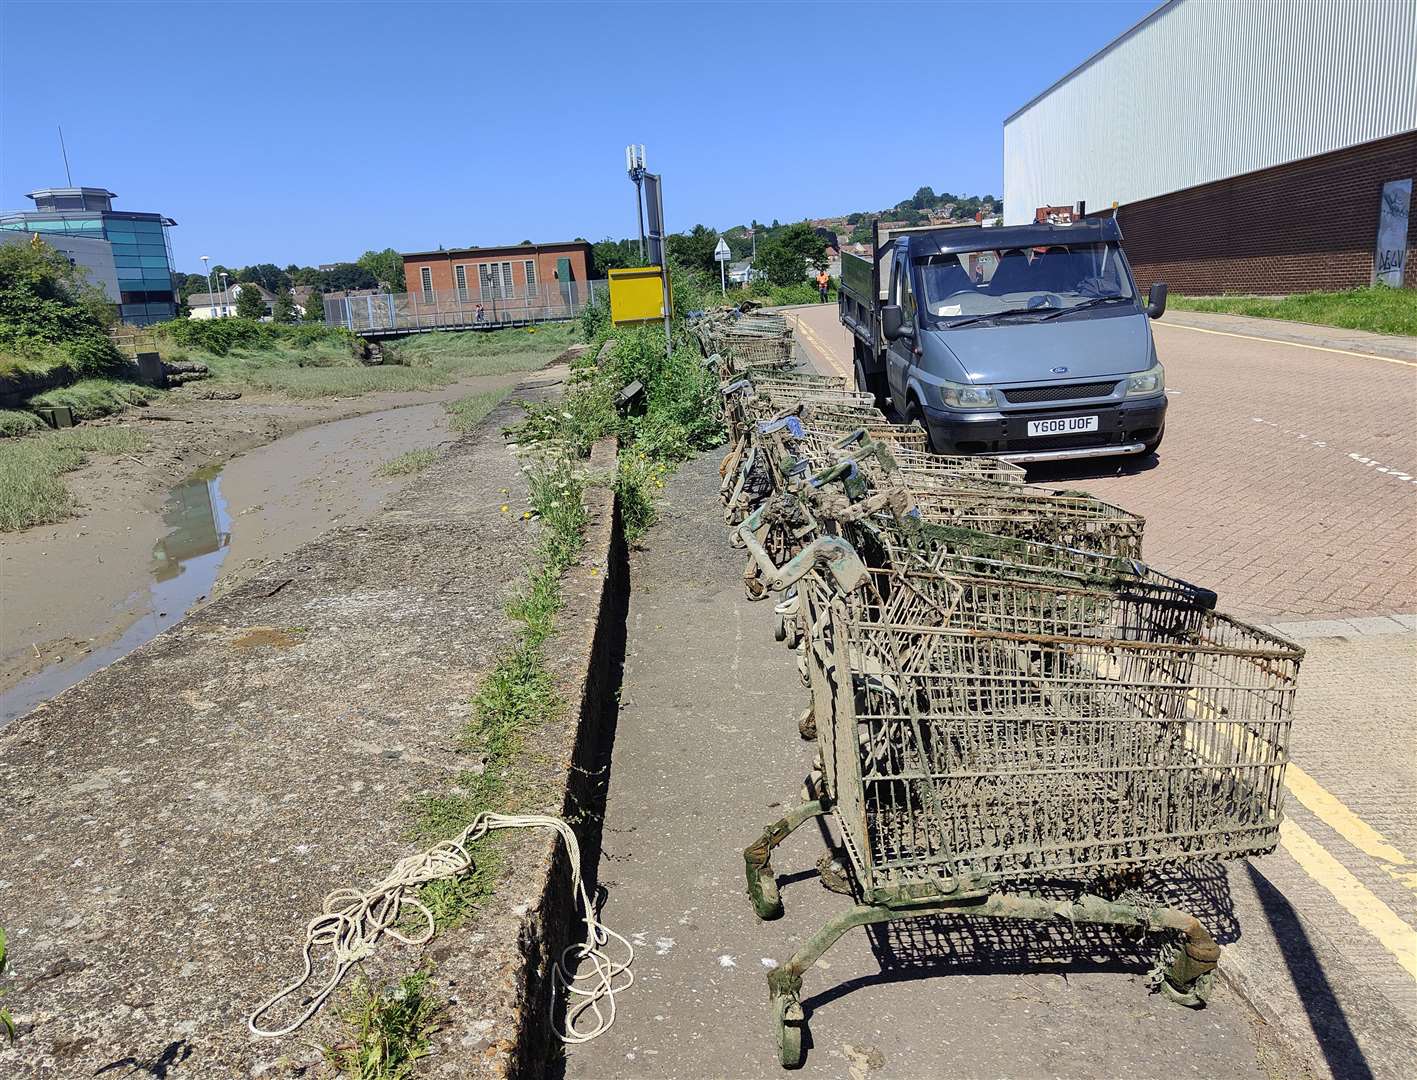 Trolleys lined up by the creek